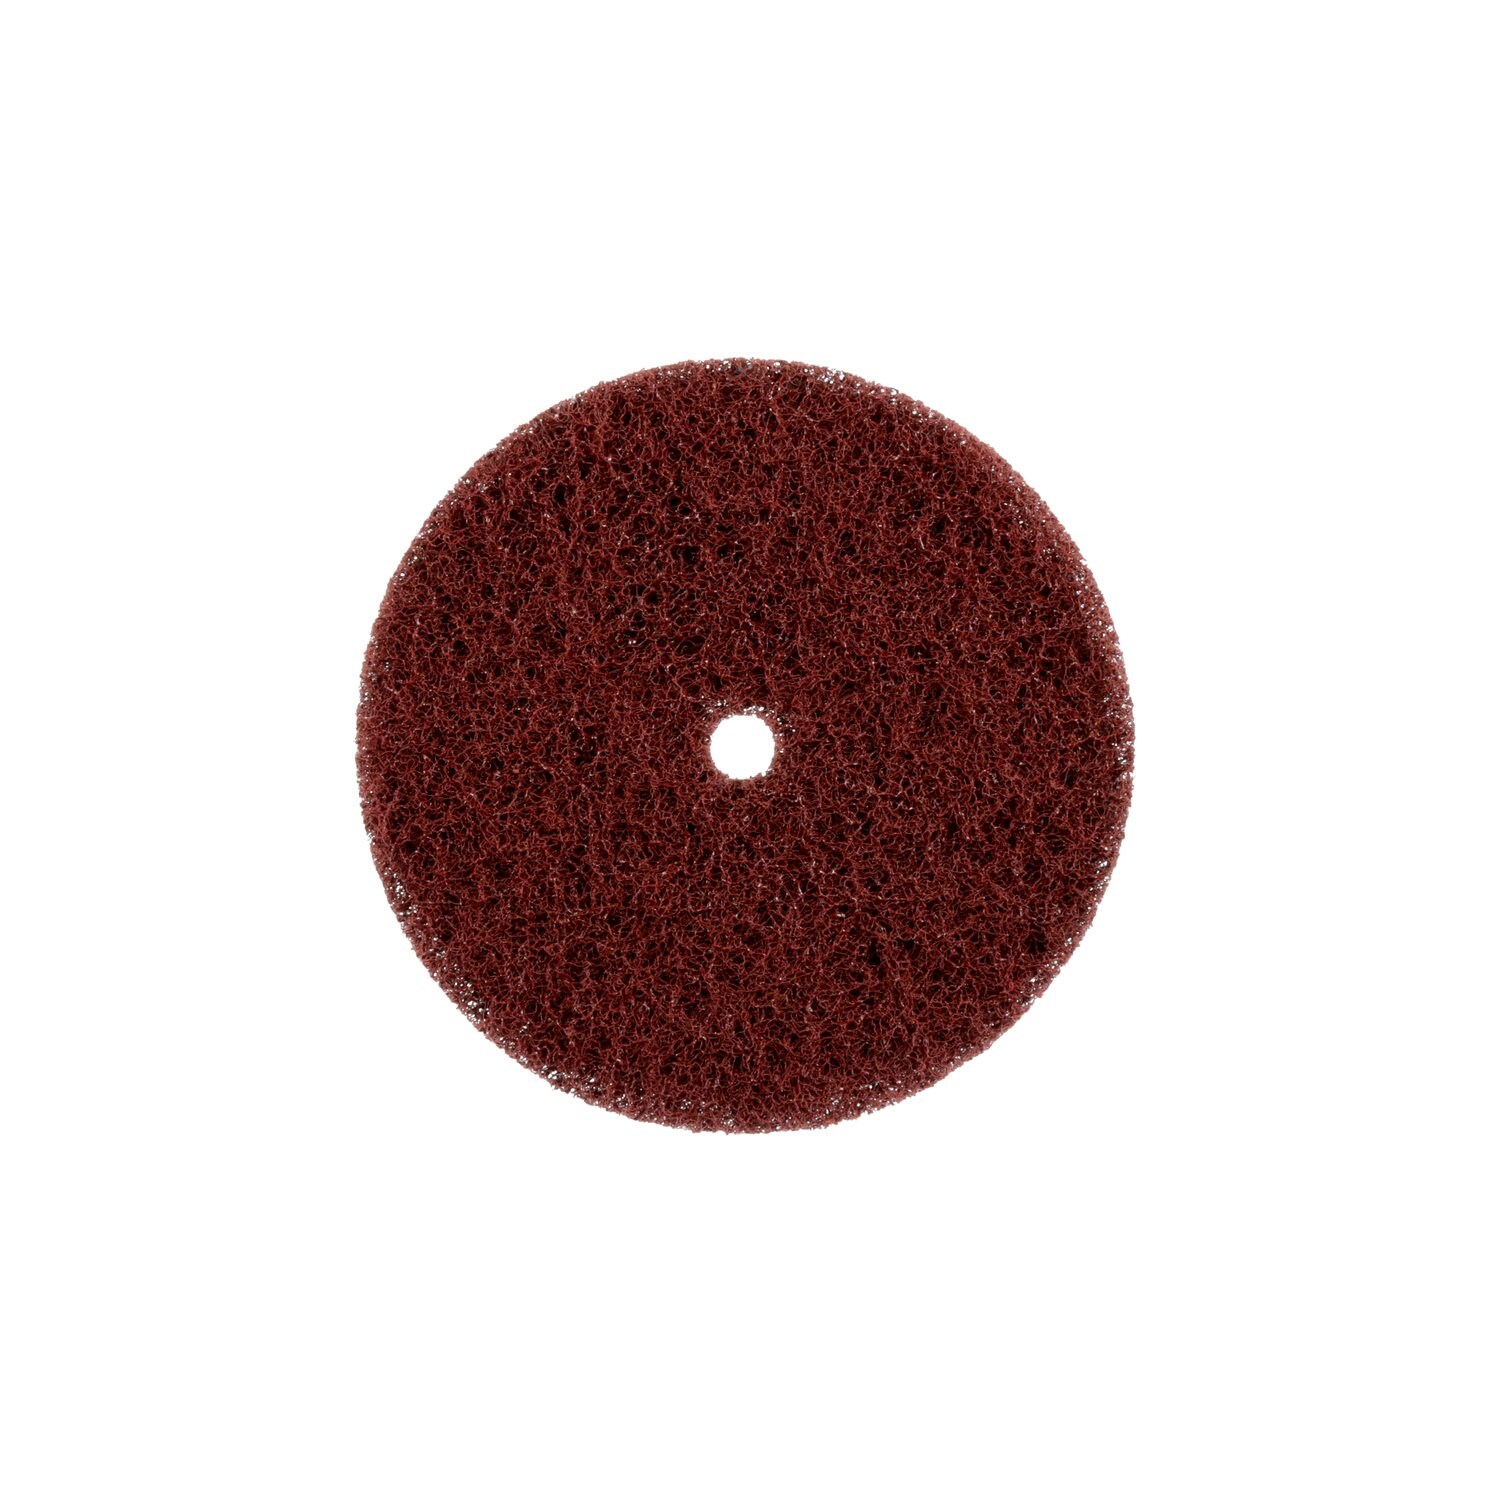 7010368560 - Standard Abrasives Buff and Blend Hook and Loop EP Disc, 820710, 6 in x
1/2 in A MED, 10/Pac, 100 ea/Case